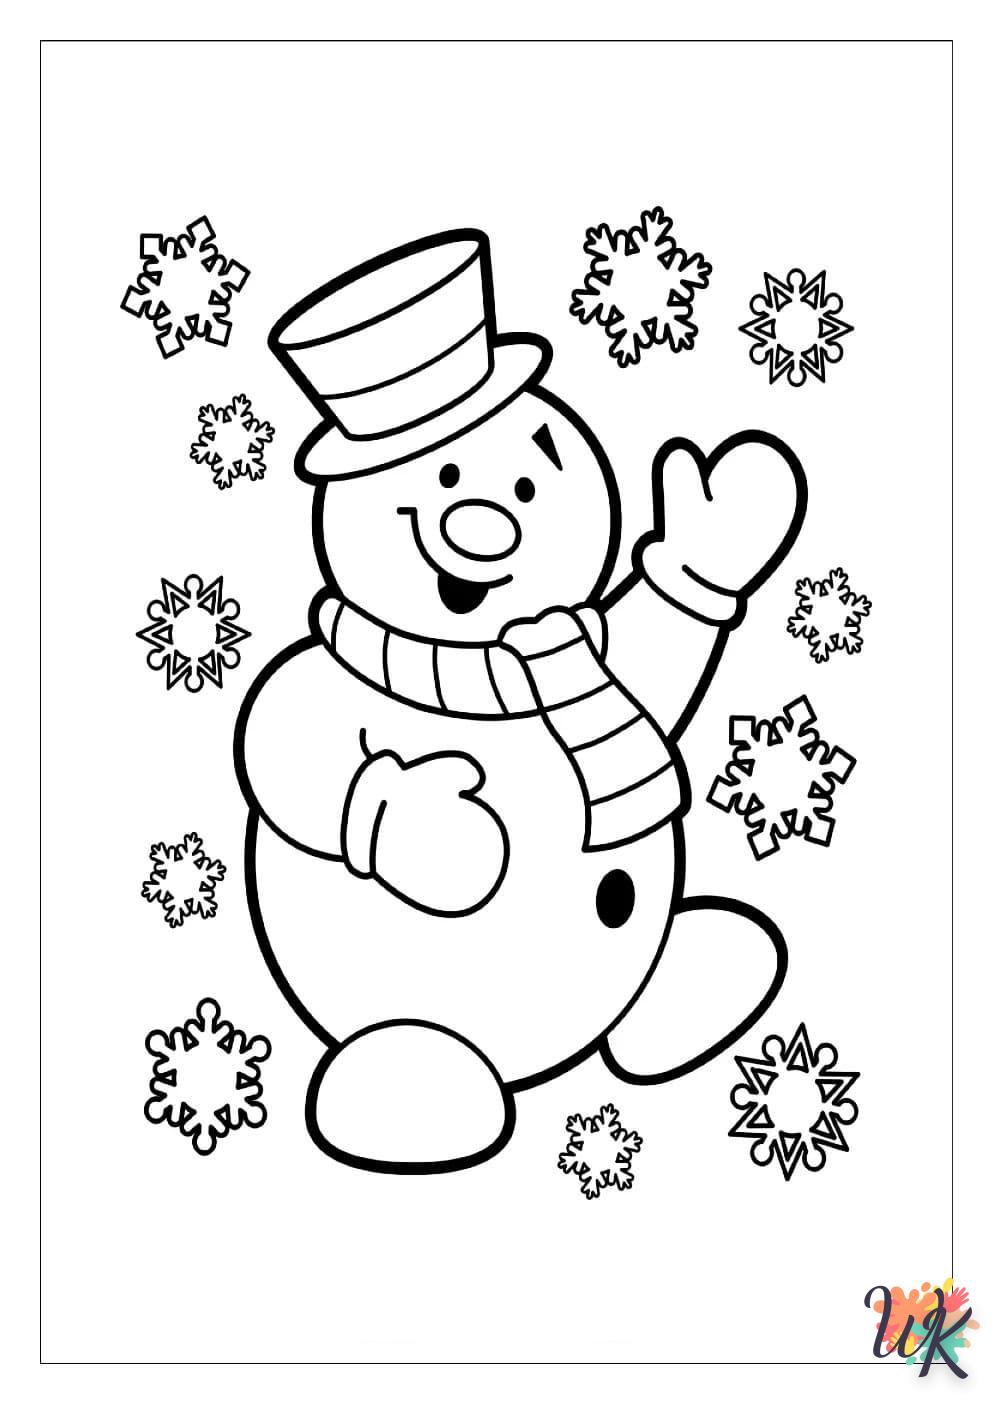 Snowman coloring page for children to print